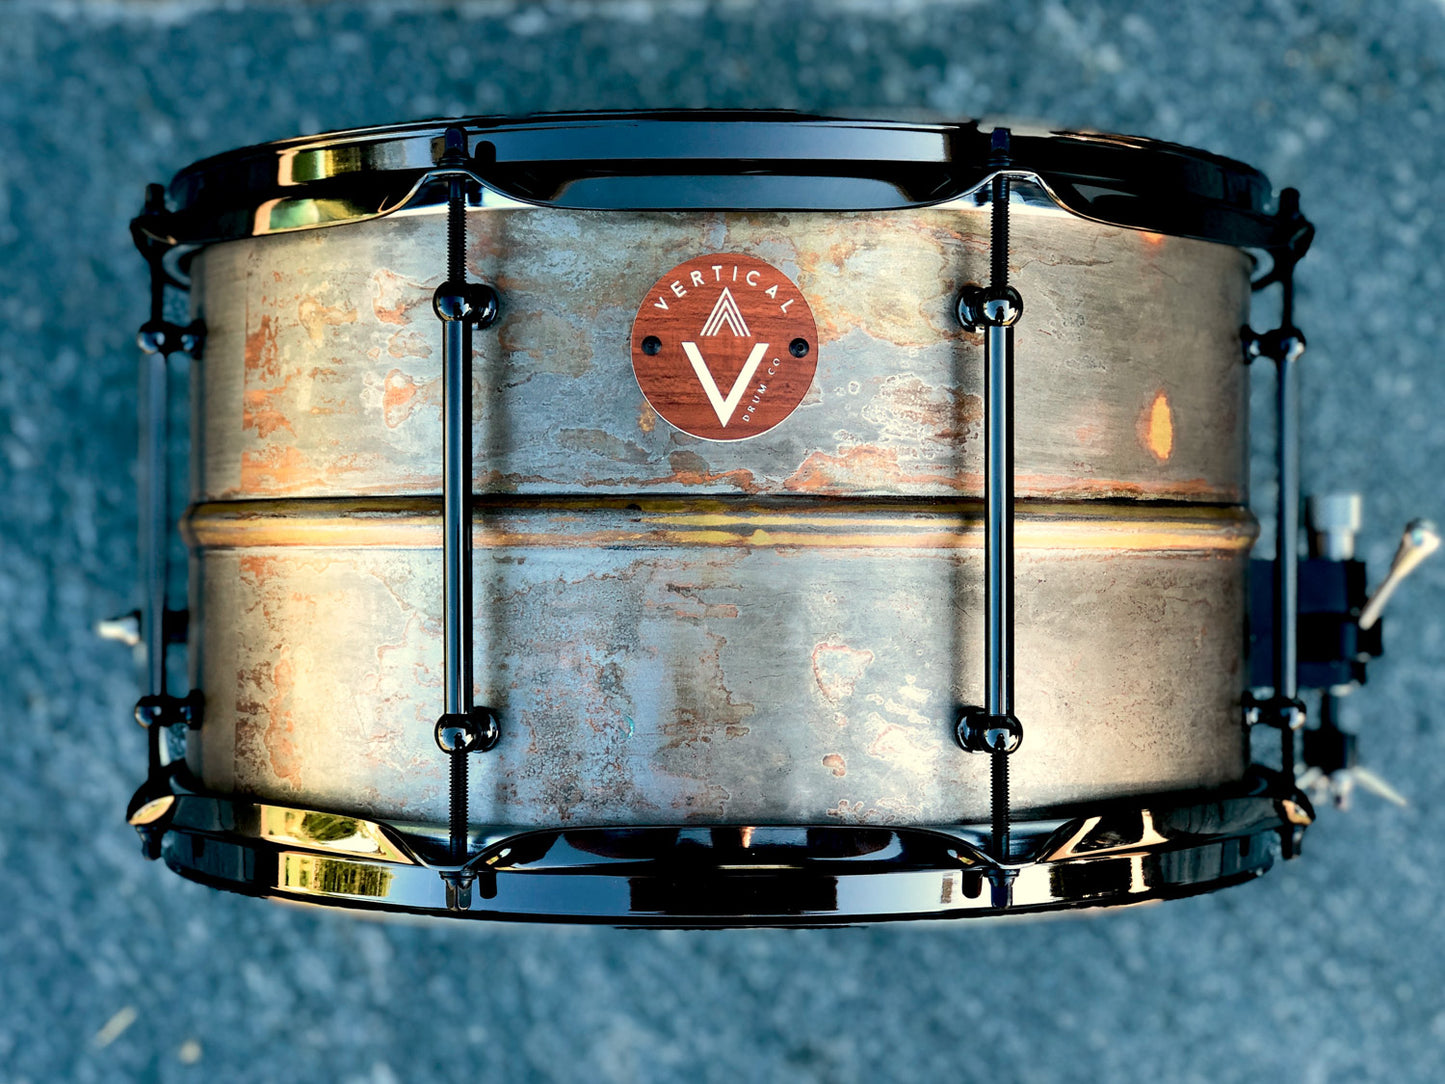 Vertical Drum Co. PATINA 'Chorus' 8×14 Beaded Black Nickel Brass Snare Drum CUSTOM ORDER MADE IN THE USA